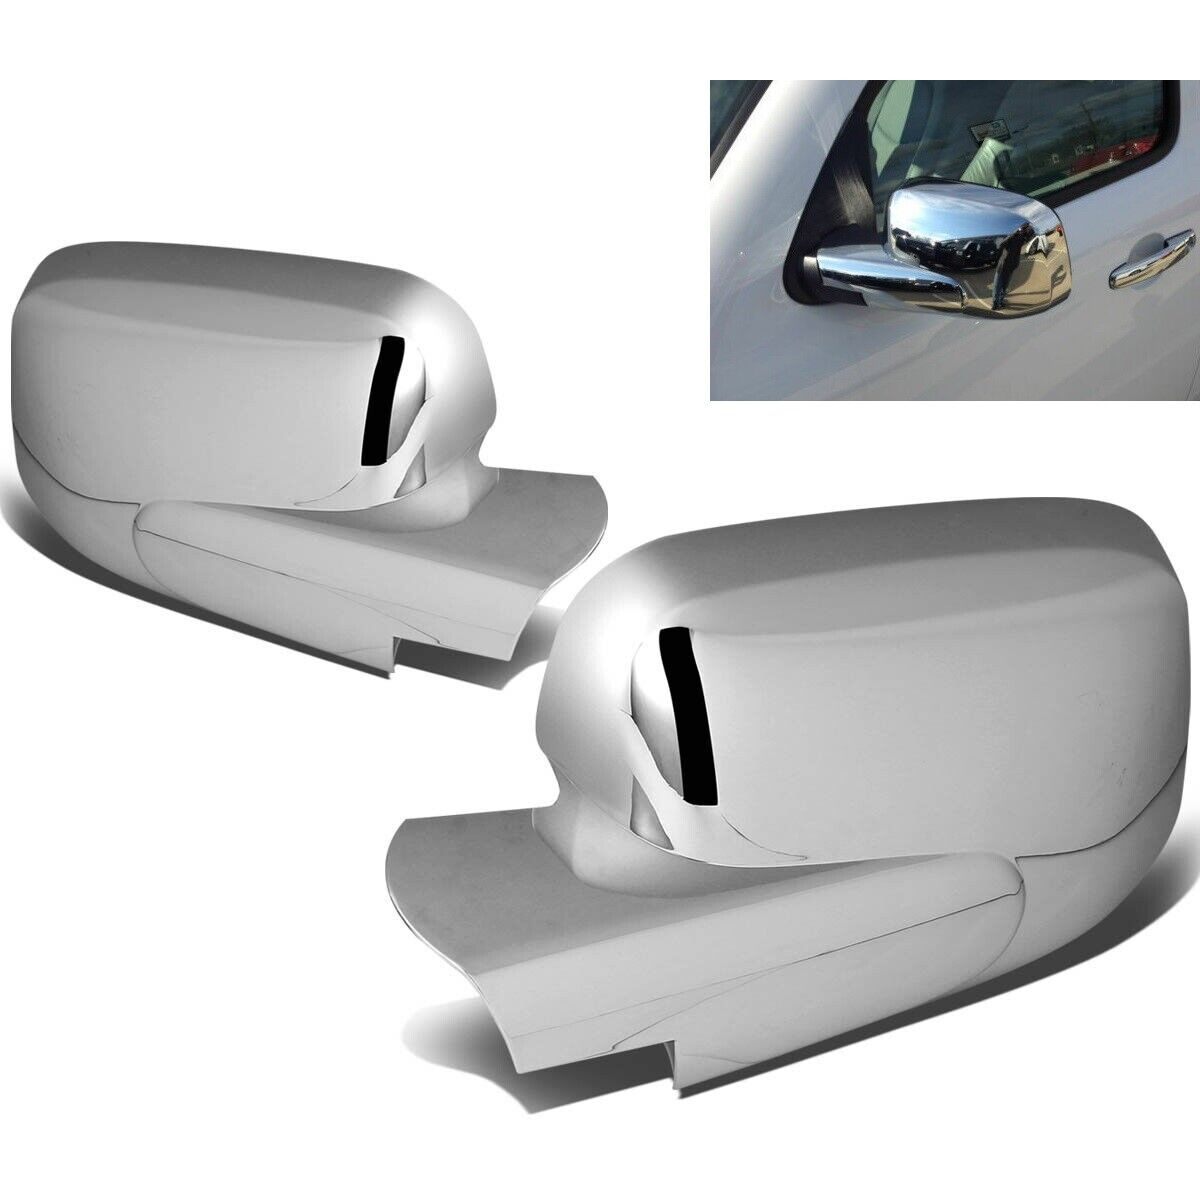 For Chevy HHR 2006 2007 2008 2009 2010 2011 Chrome Mirror Covers (Full Style)